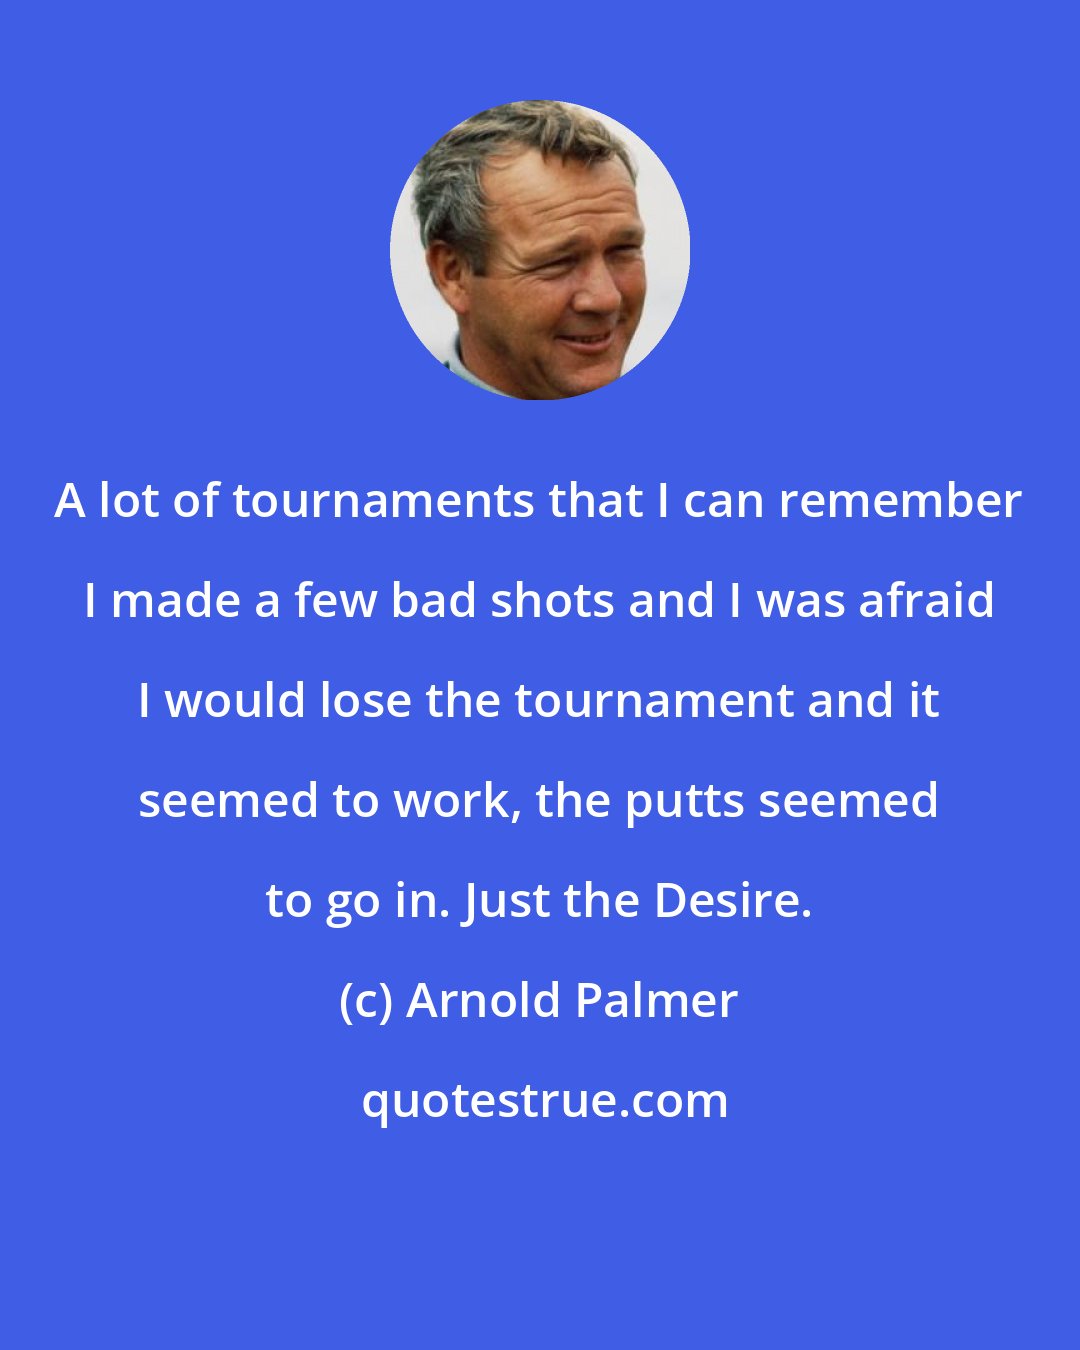 Arnold Palmer: A lot of tournaments that I can remember I made a few bad shots and I was afraid I would lose the tournament and it seemed to work, the putts seemed to go in. Just the Desire.